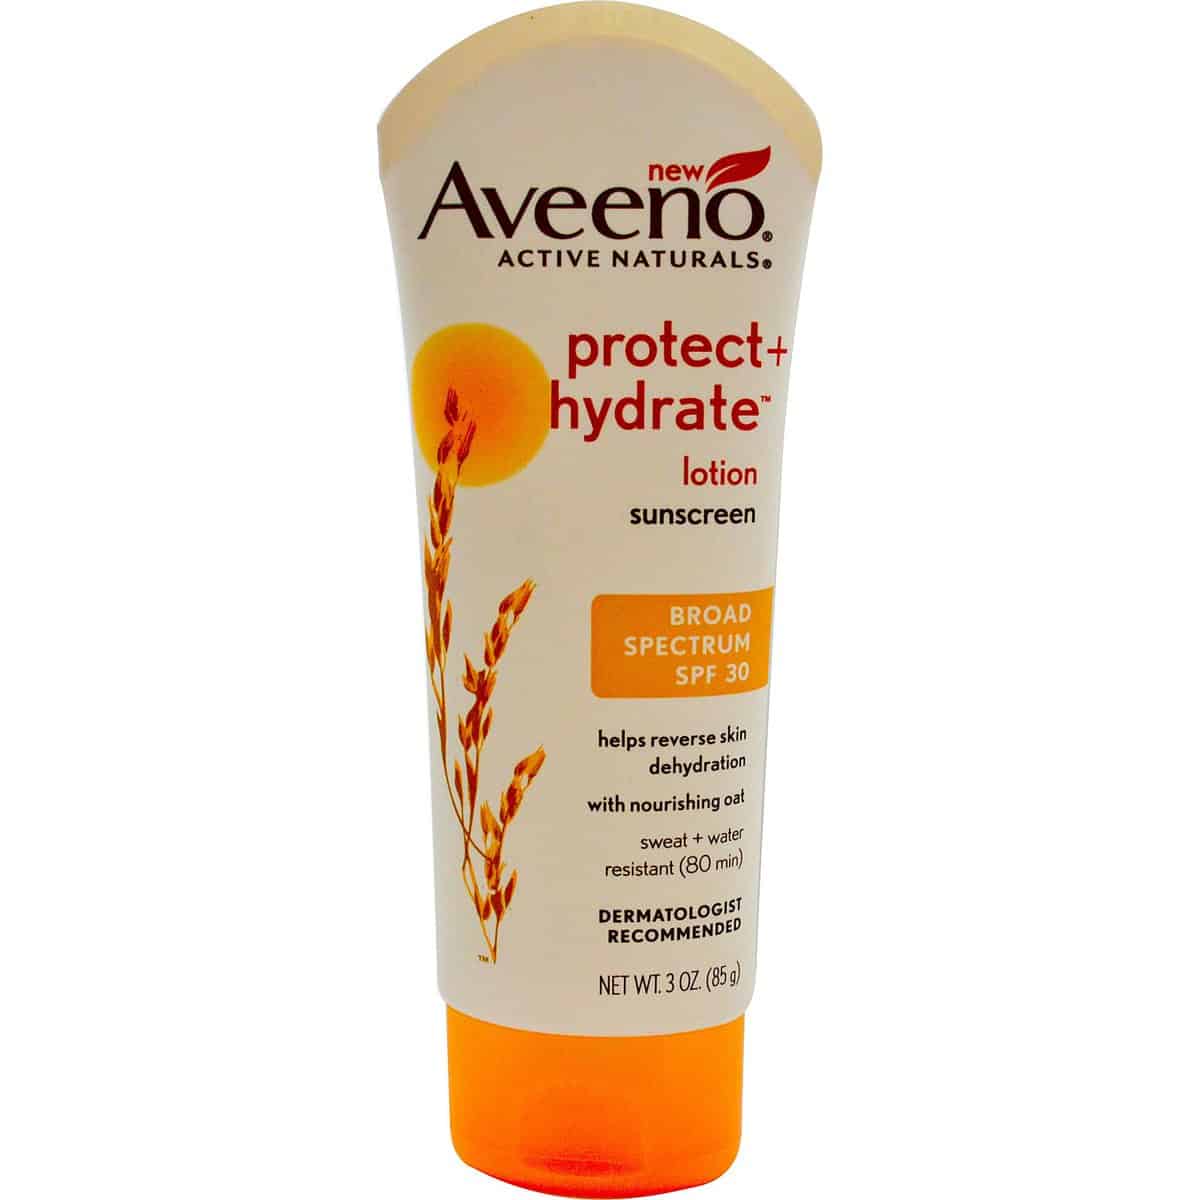 AVEENO PROTECT + HYDRATE® Lotion Sunscreen with Broad Spectrum SPF 30 combines ENVIROGUARD™ Technology and ACTIVE NATURALS® Colloidal Oatmeal to deliver superior broad spectrum UVA/UVB sun protection while hydrating skin to keep it soft, smooth and feeling healthier than before you went in the sun. For use on face and body, this exclusive formula is fast absorbing, oil free, noncomedogenic, and sweat and water-resistant for 80 minutes. a Uncategorized from